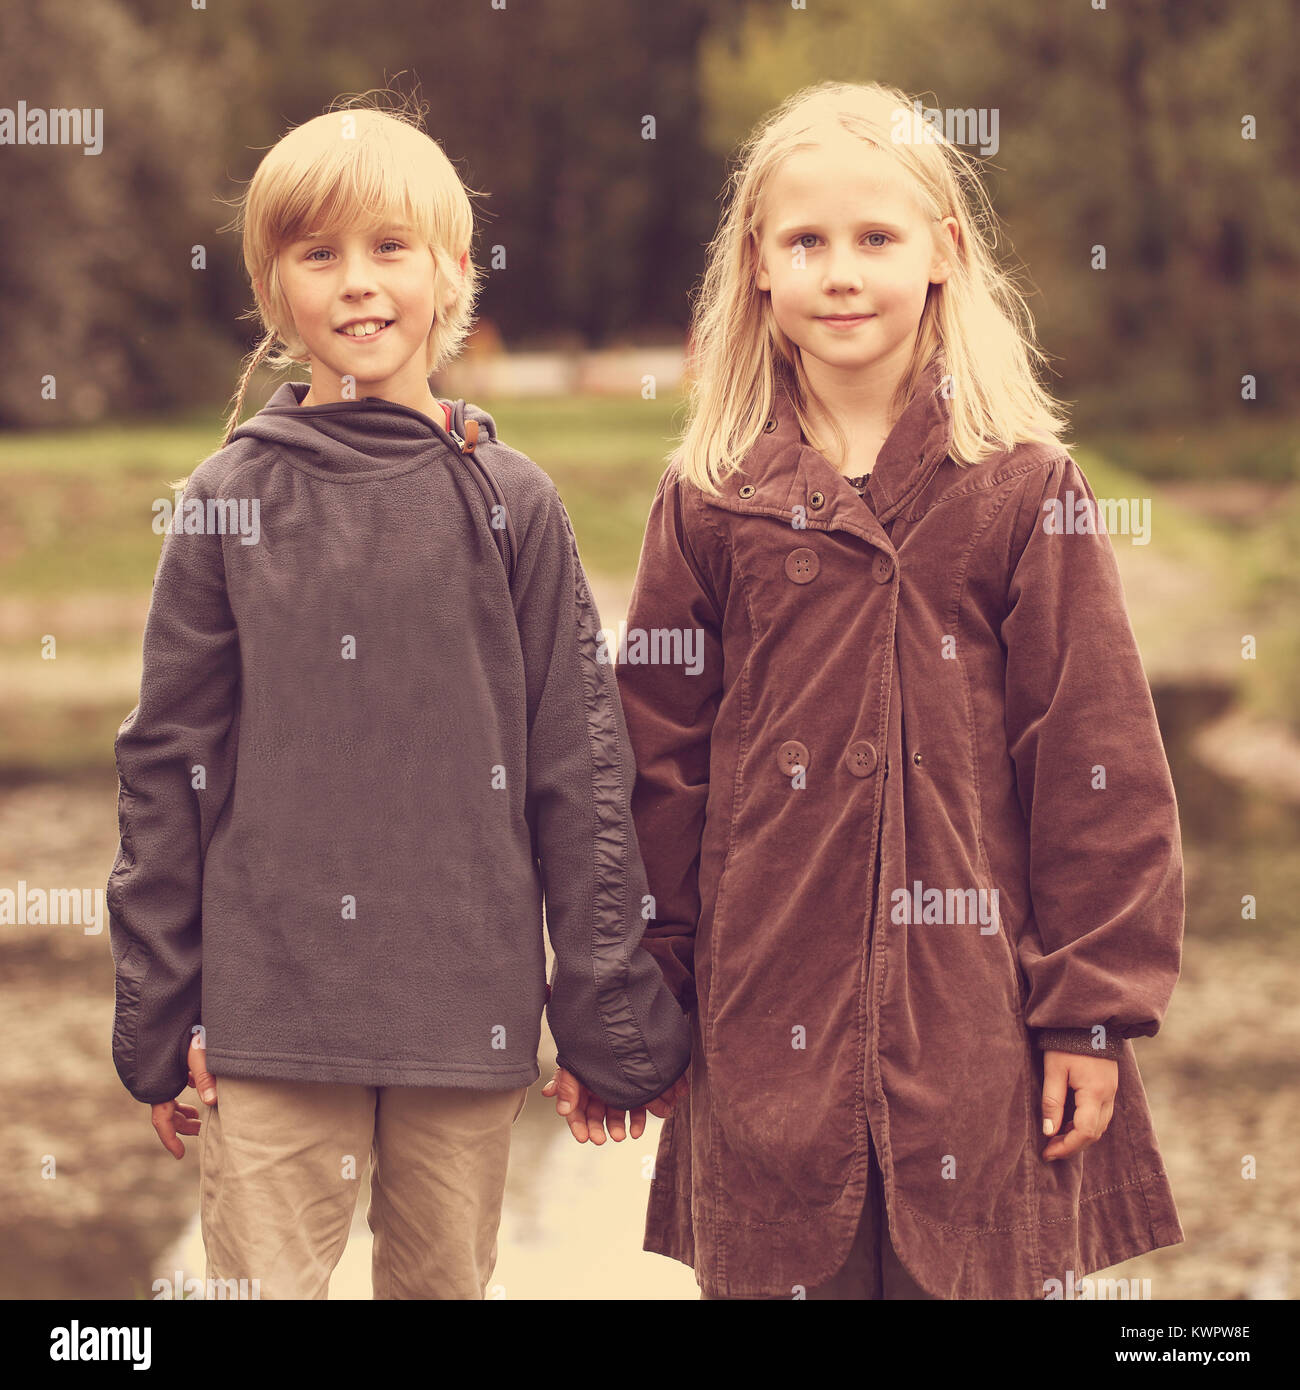 Happy kids outdoors, little boy and girl holding hands Stock Photo